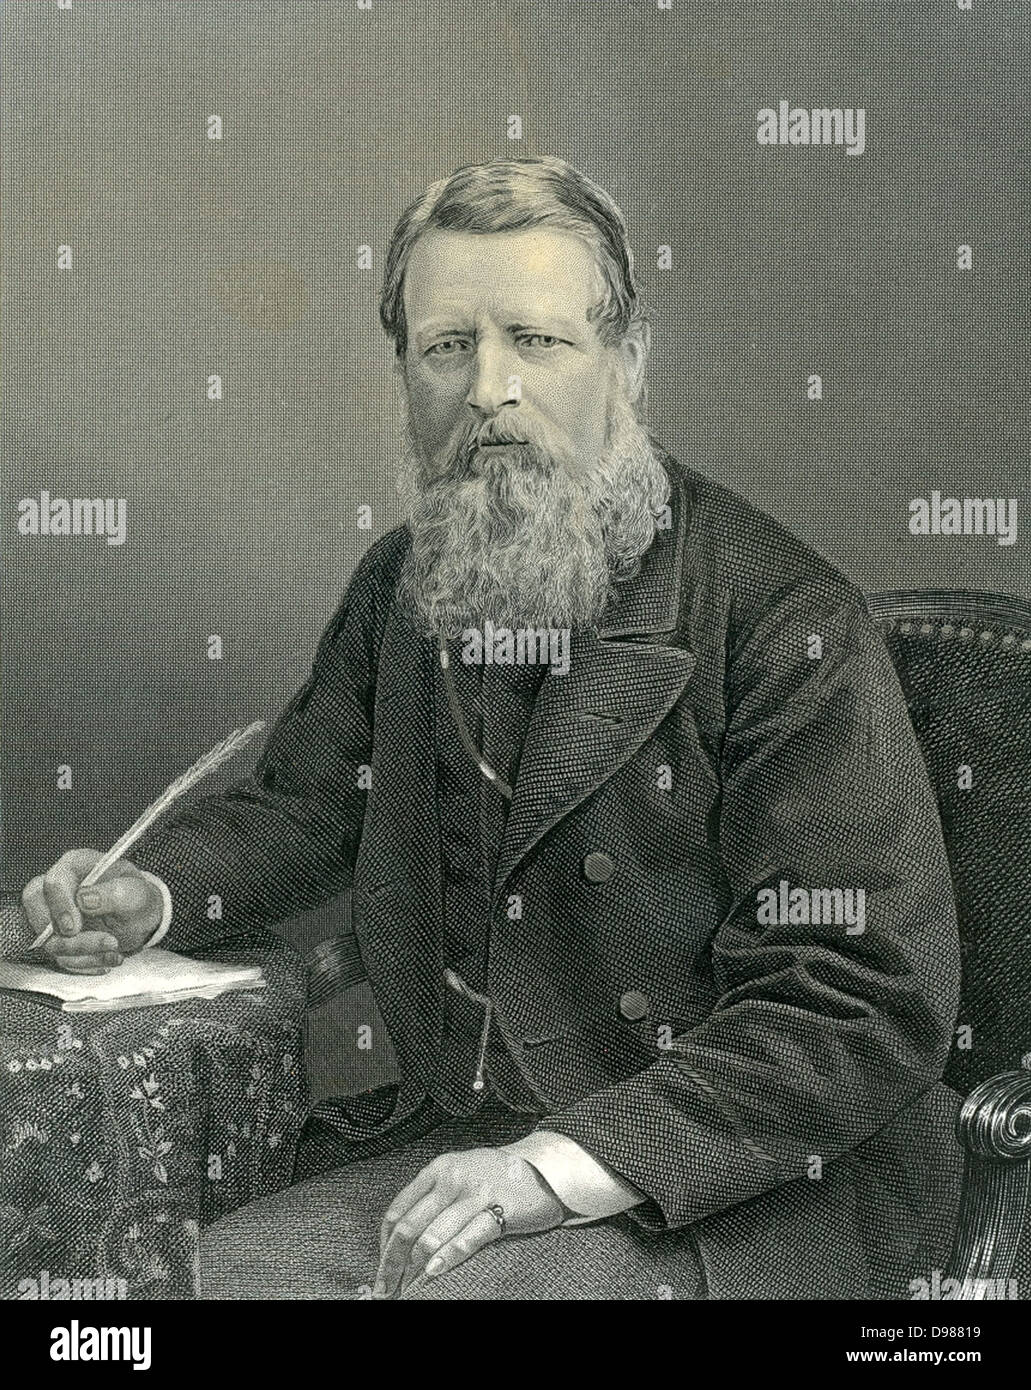 Stafford Henry Northcote, first Earl of Iddesleigh (1818-1887) English statesman. Chancellor of the Exchequer 1874. In 1876 he became leader of the Conservative party in the House of Commons. Engraving after a photograph. Stock Photo